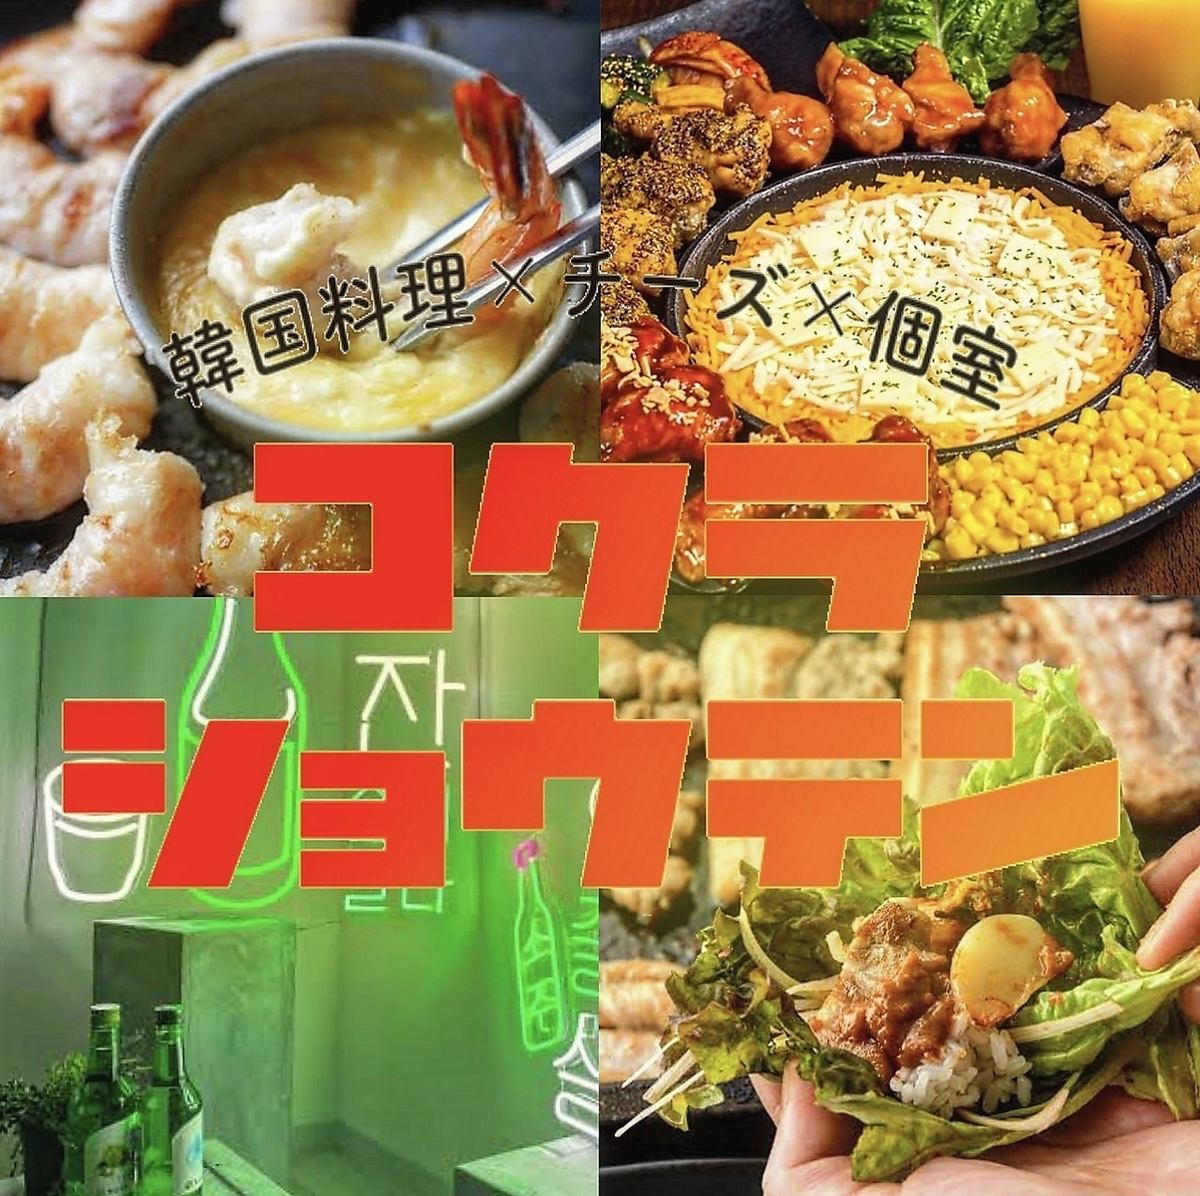 All-you-can-eat and drink for 3 hours, including choa chicken and samgyeopsal, starting at 3,000 yen!